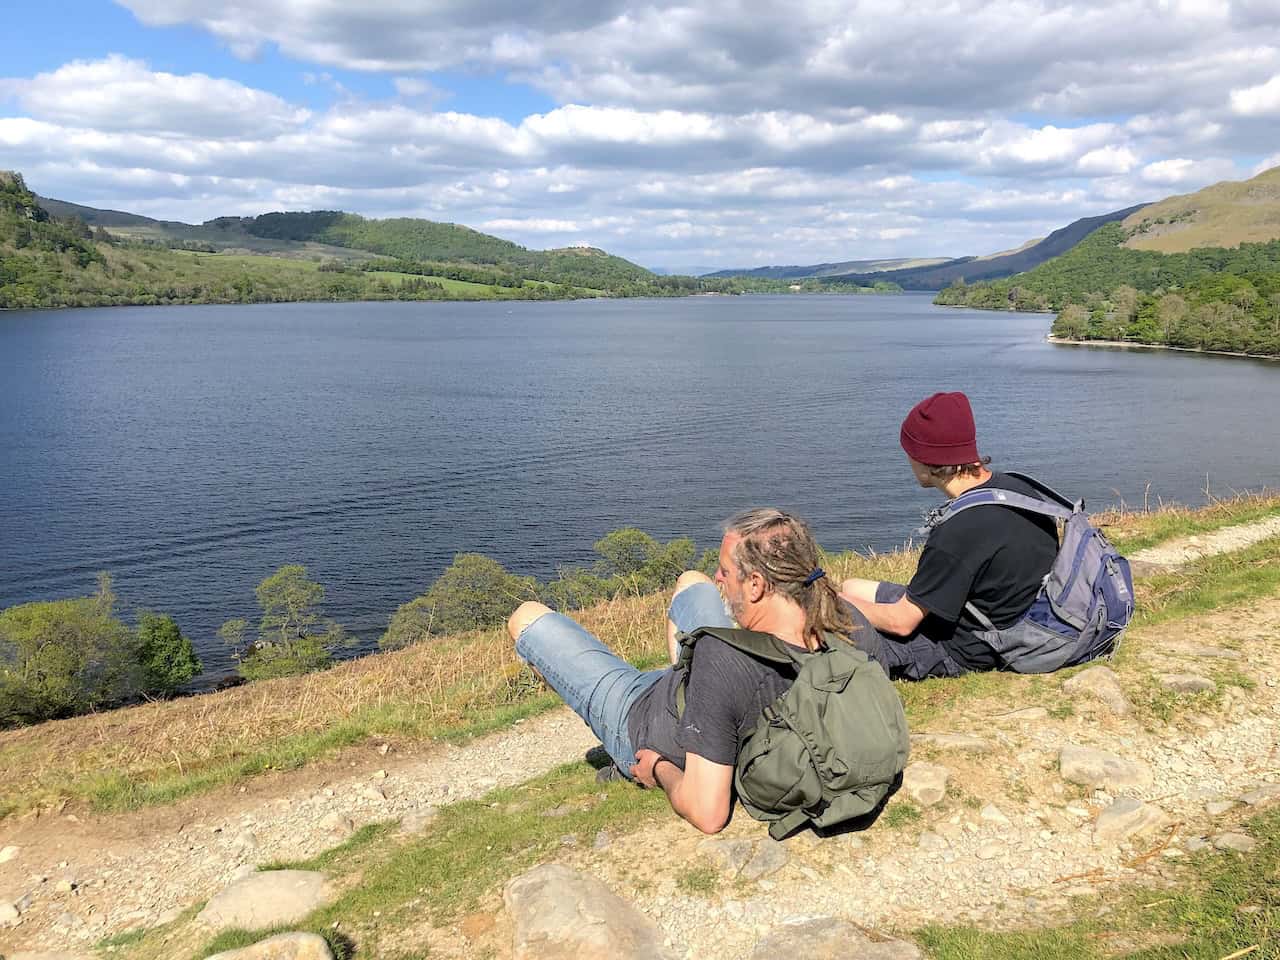 Relaxing and enjoying the views during our Ullswater walk.